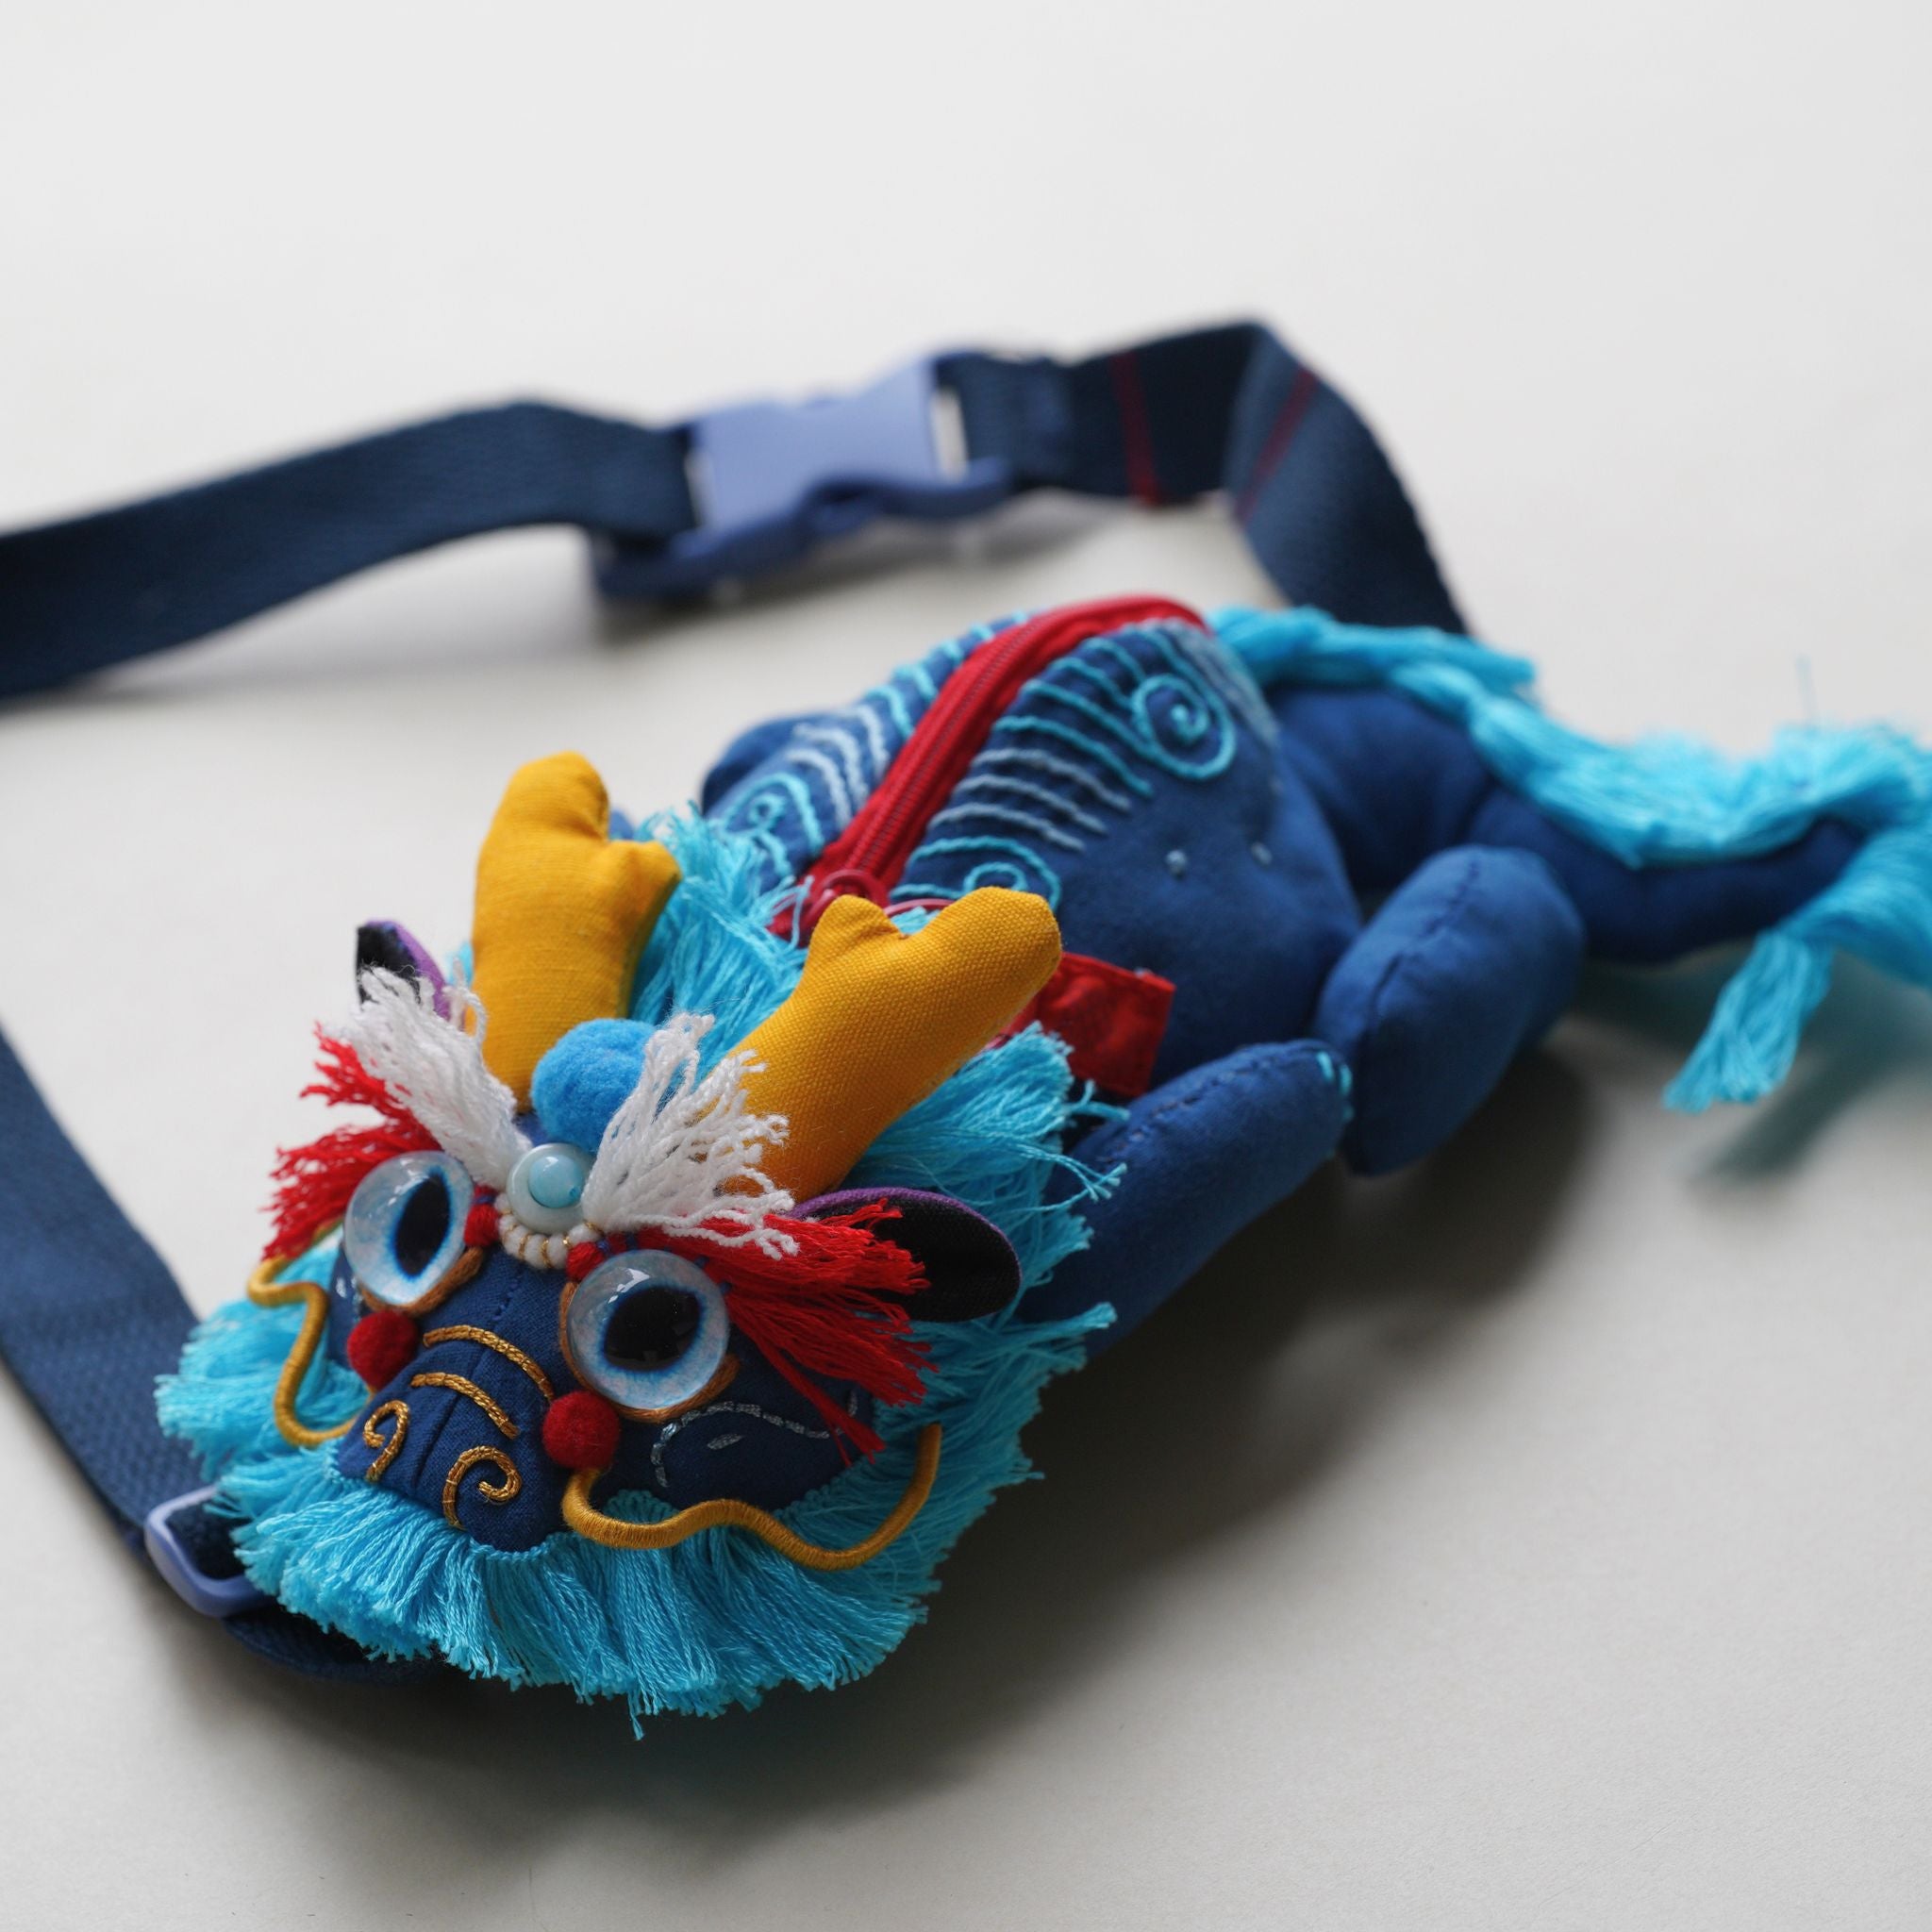 Cloth Embroidery Gift | DIY Kit | Blue Dragon BagEmbroidery DIY Kit for Beginners, Unique Auspicious Fabric sachet with auspicious cicada design. Free international delivery for orders over $100.